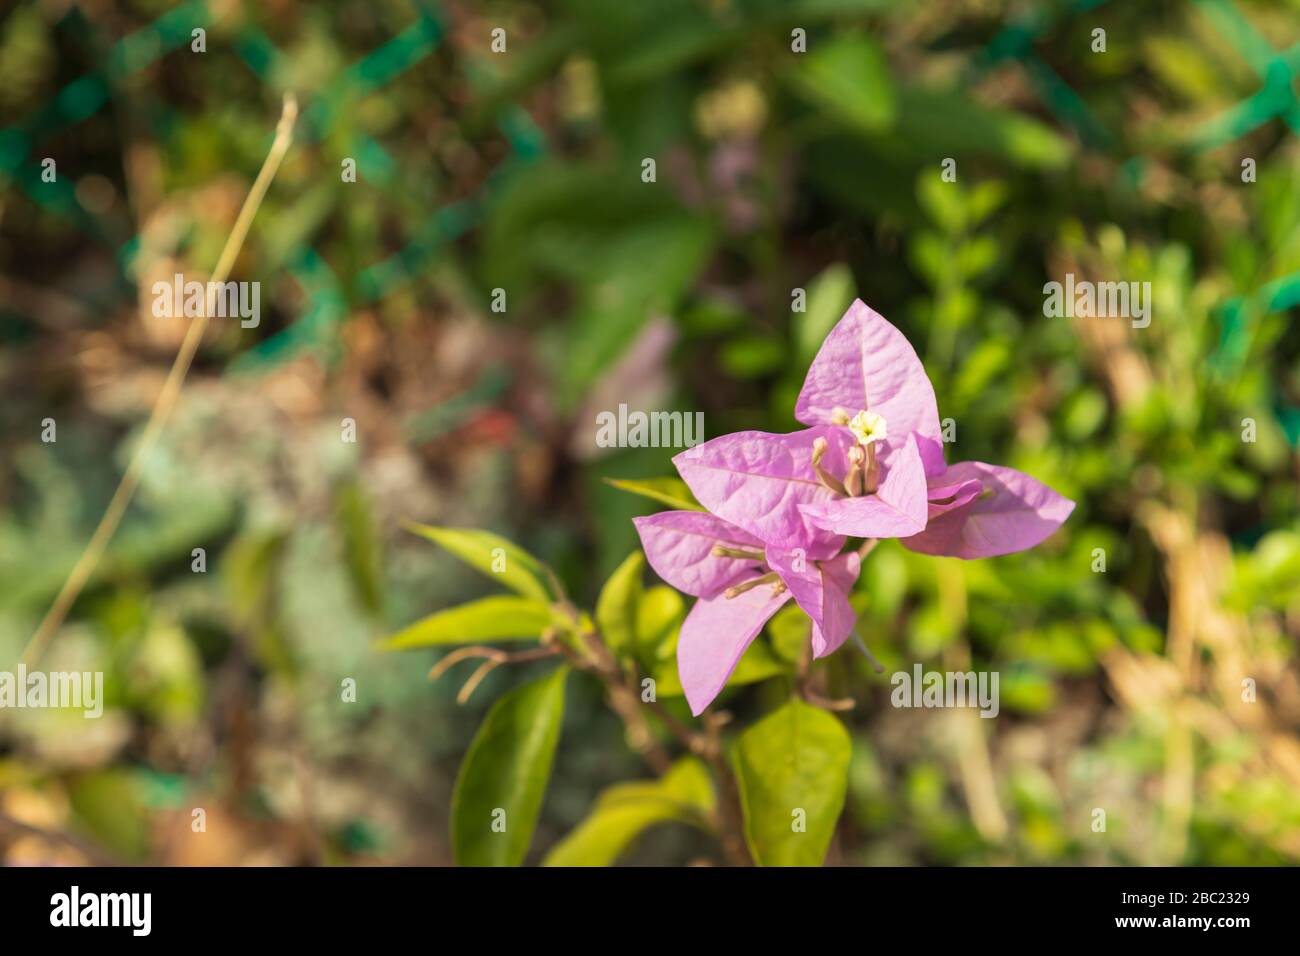 Beautiful natural bright pink bougainvillea flower surrounded by green plant life while basking in the sun light on a hot day in tropical Saint Lucia Stock Photo